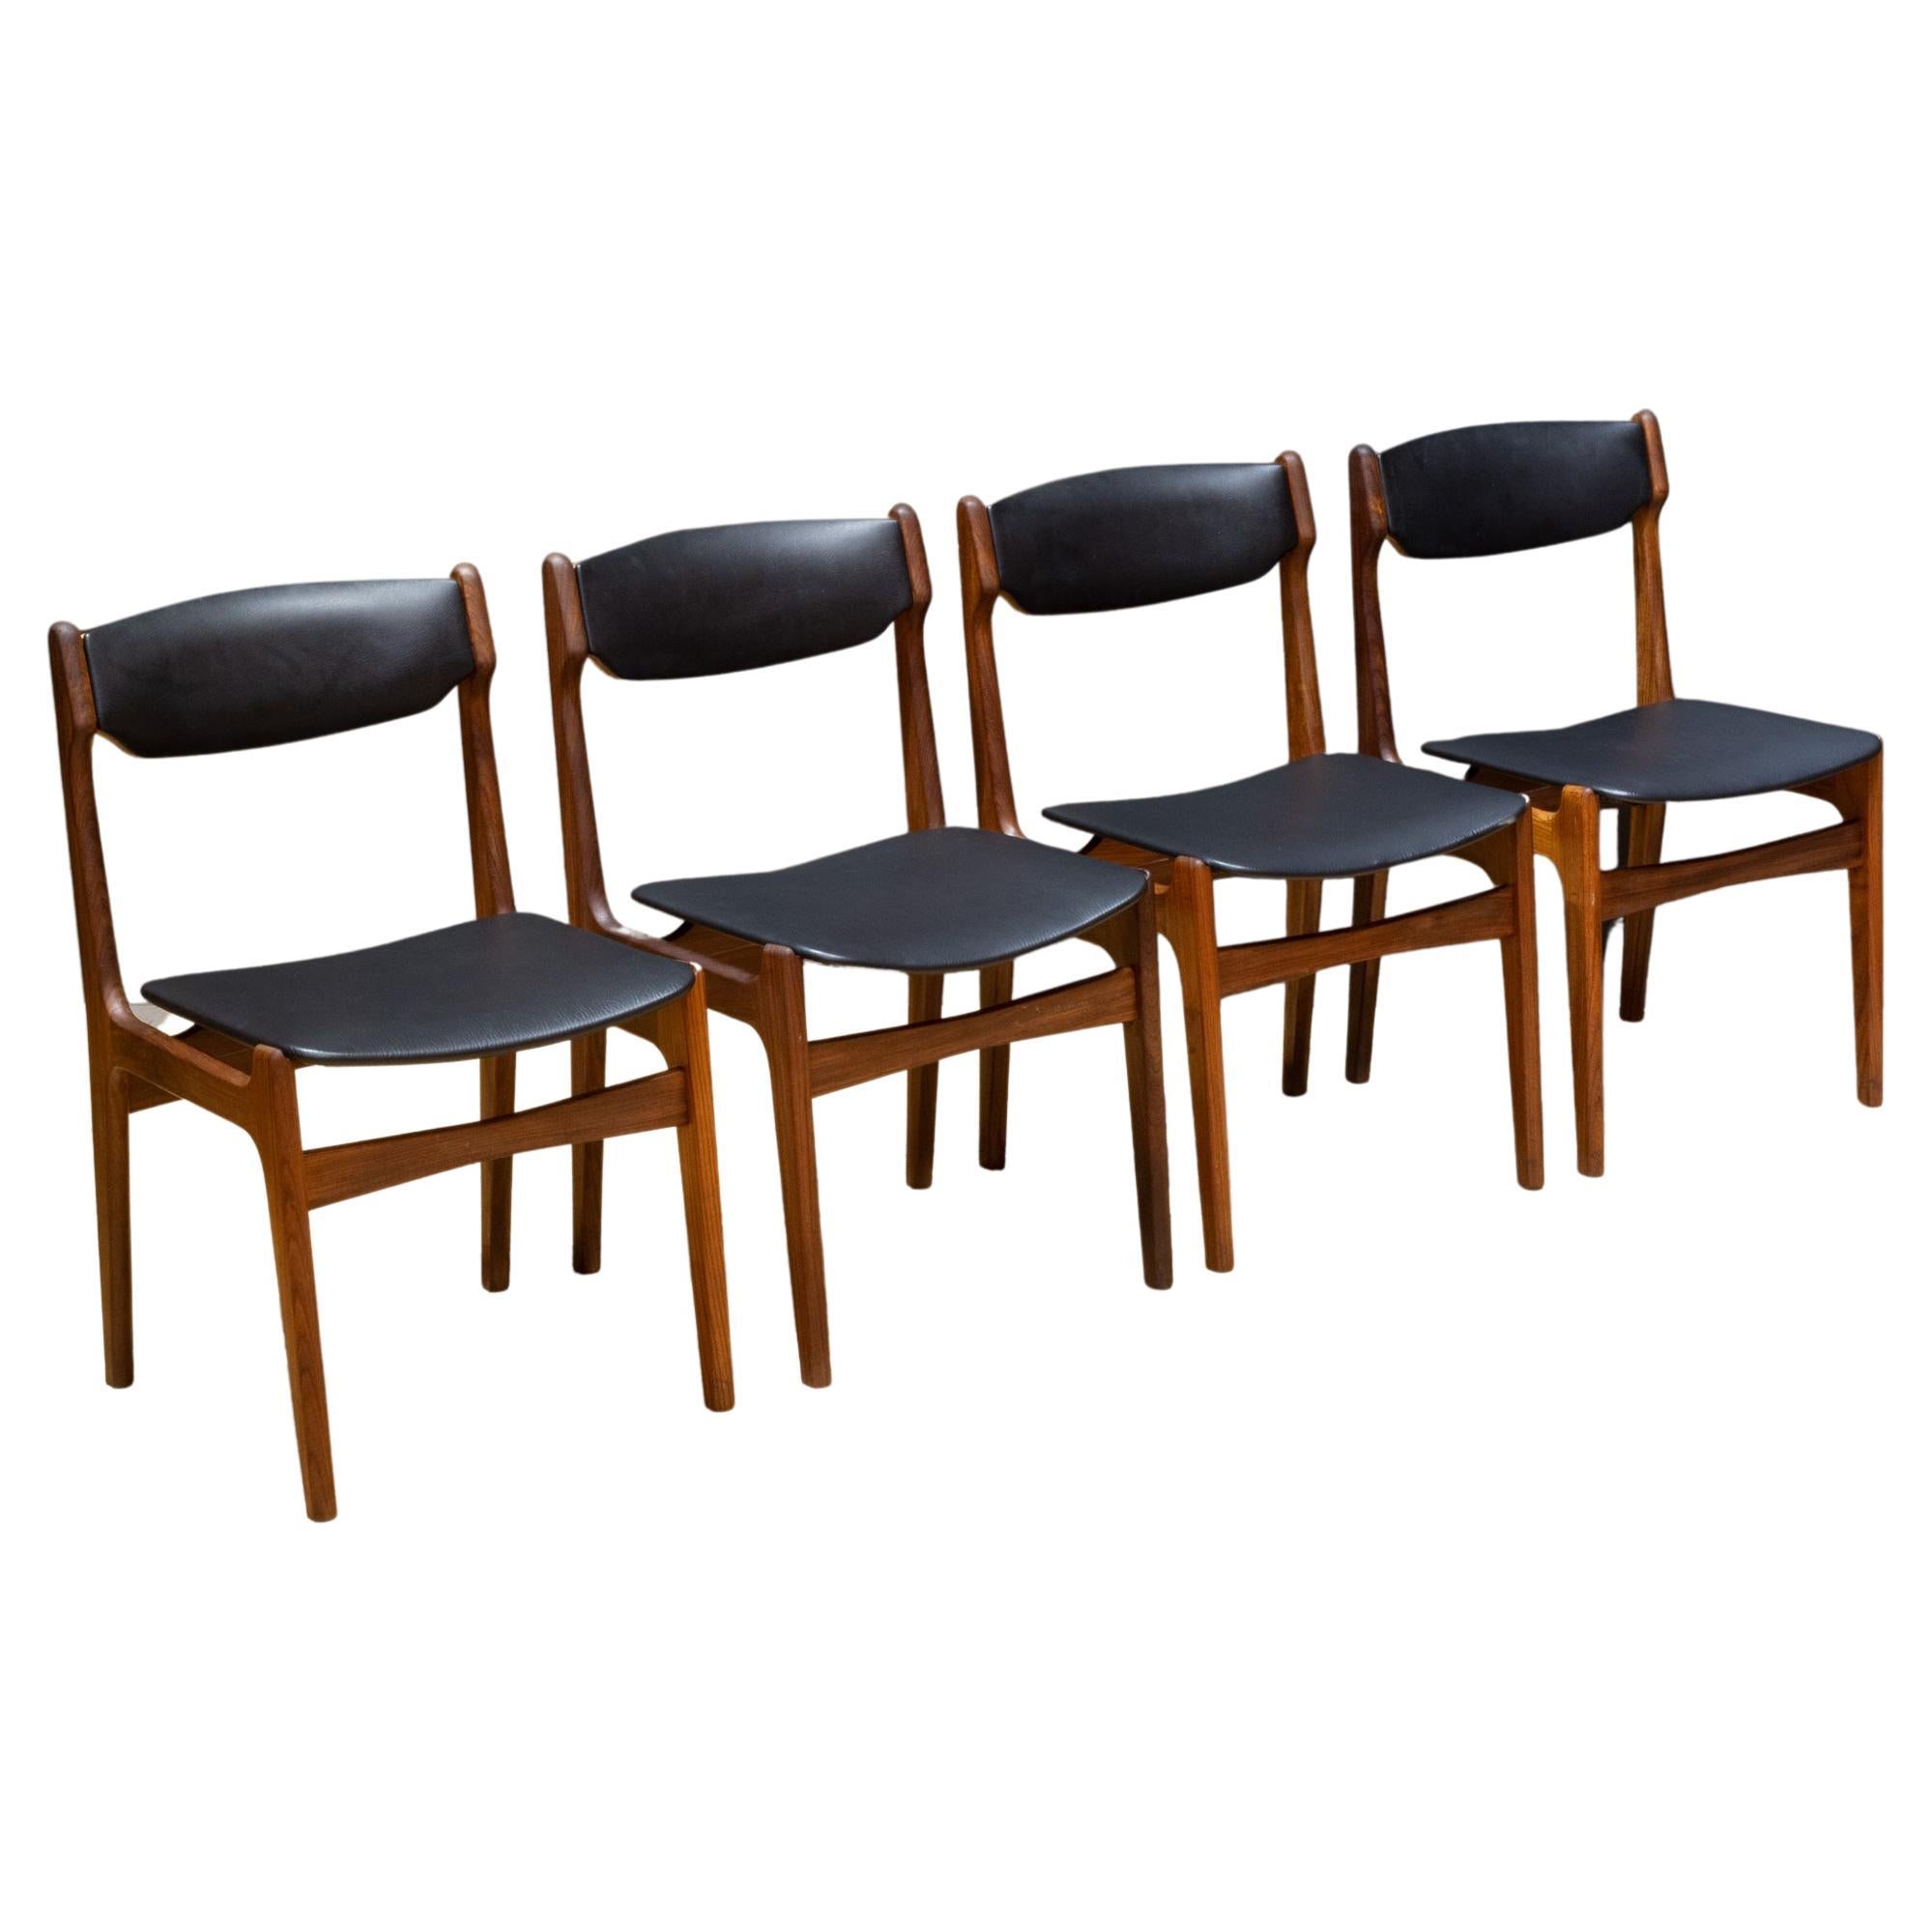  Mid-century Reupholsted Teak Dining Chairs c.1960 For Sale